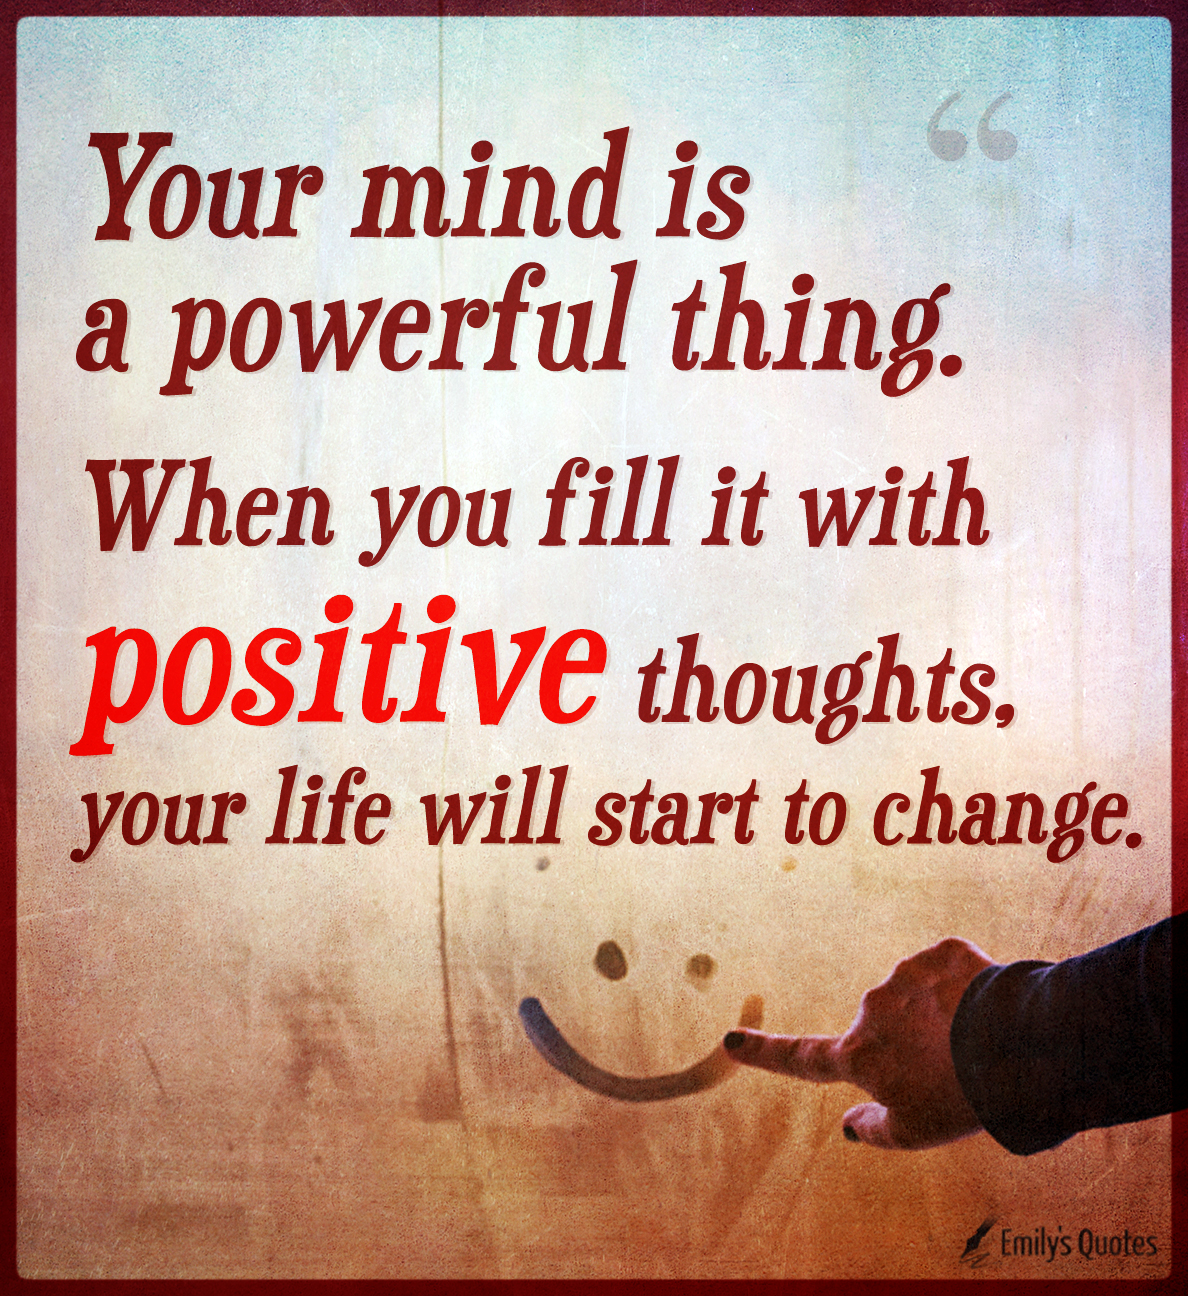 Your mind is a powerful thing. When you fill it with positive thoughts